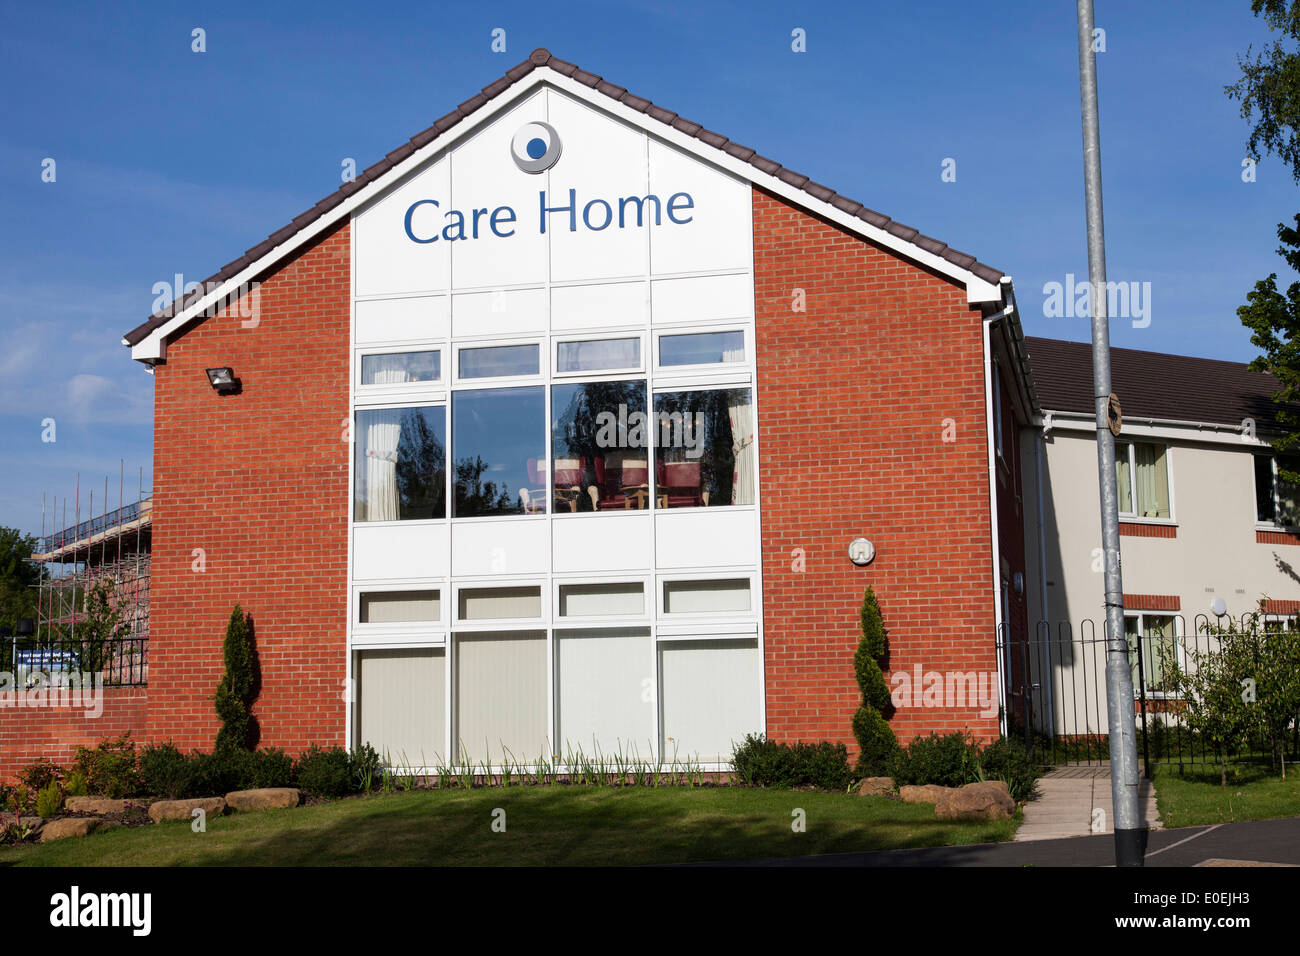 A residential care home in a U.K. city. Stock Photo